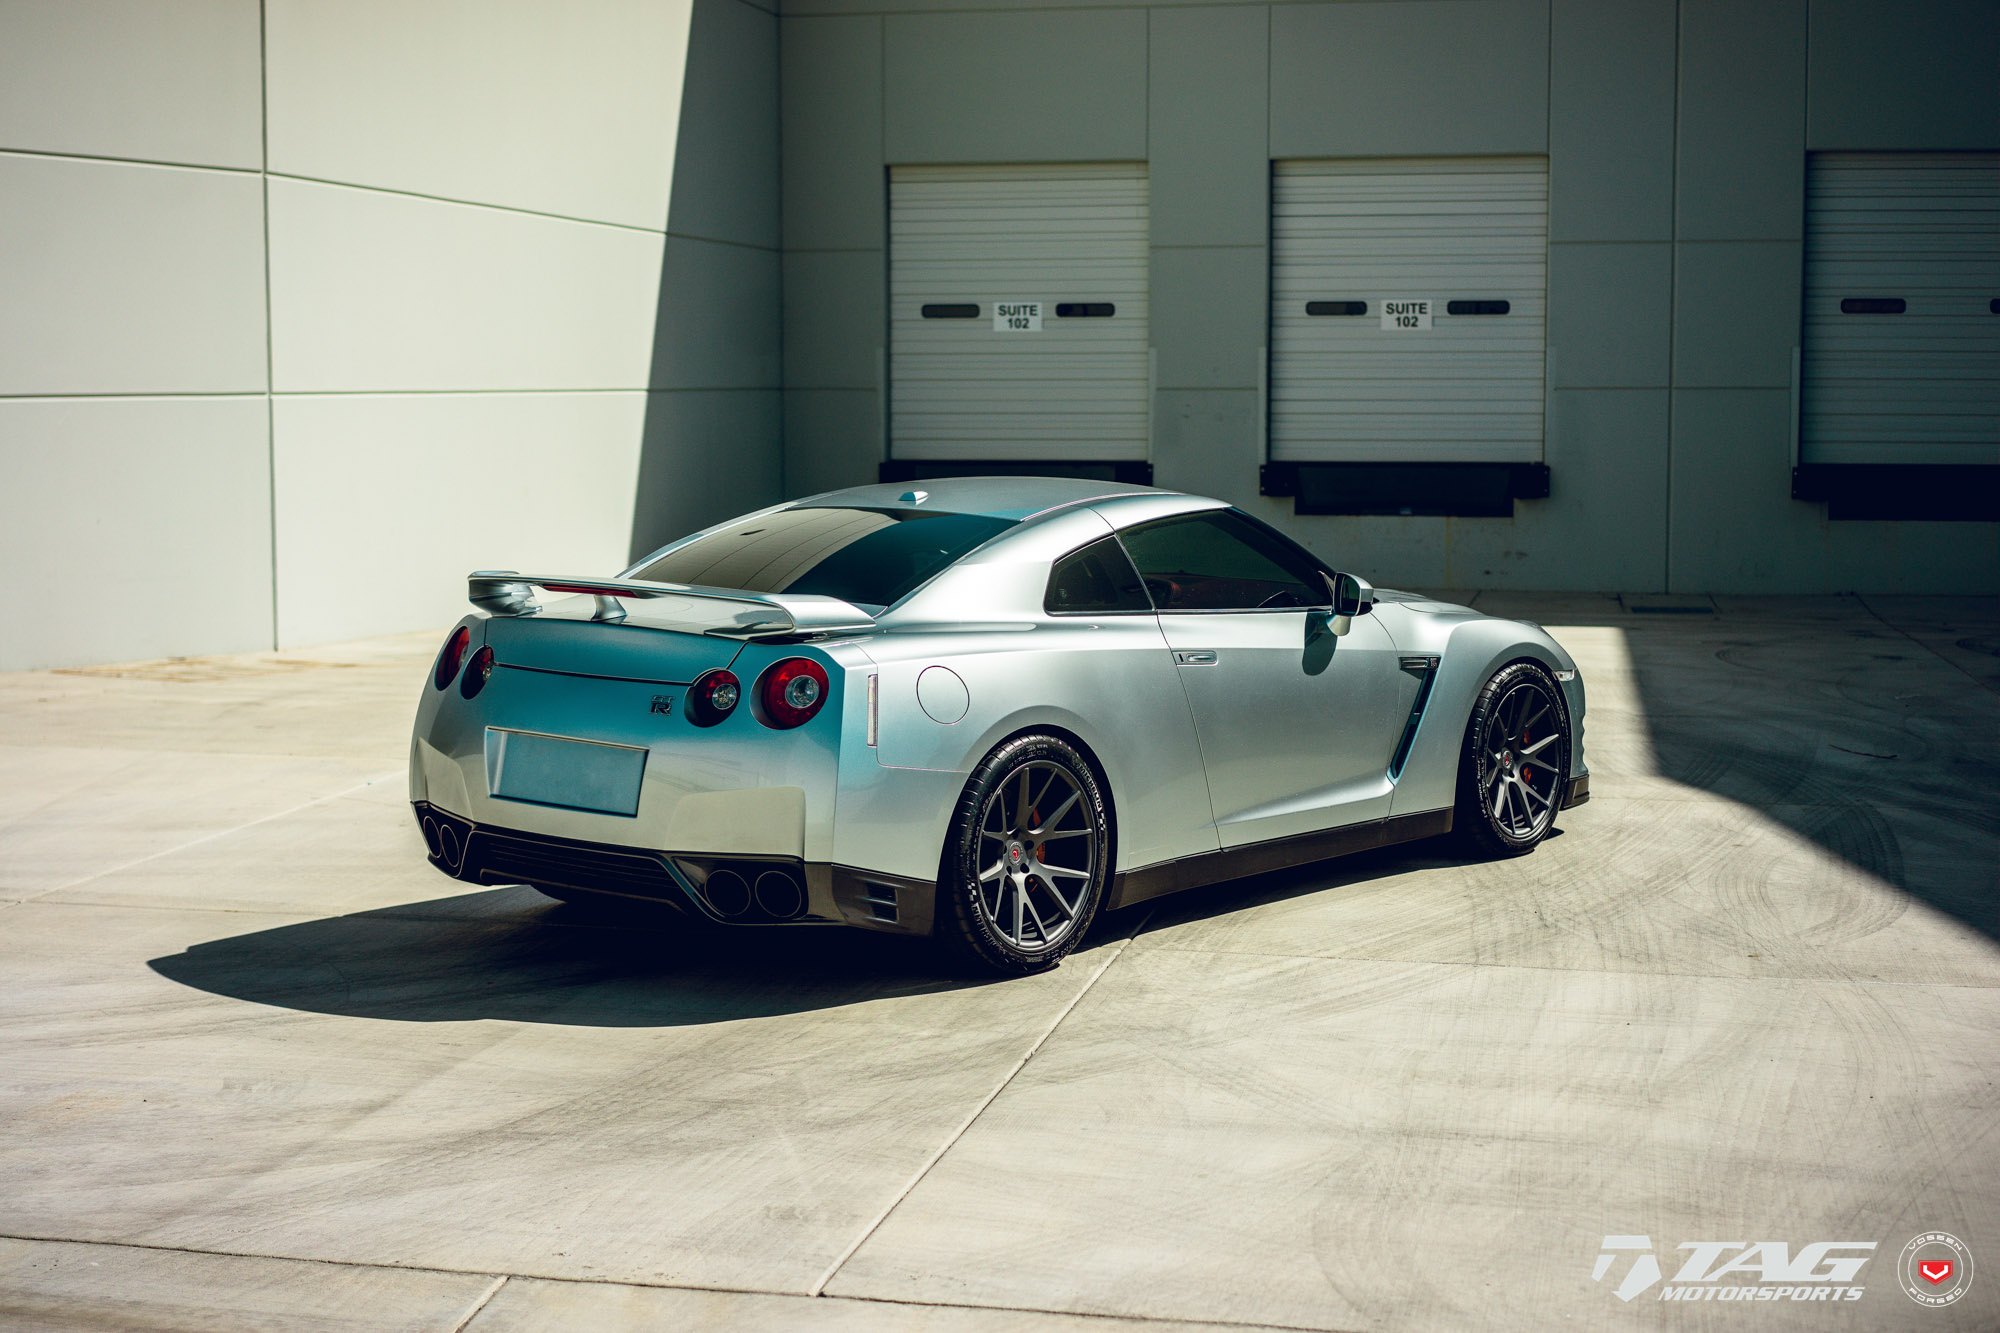 Rear Spoiler with Light on Silver Nissan GT-R - Photo by Vossen